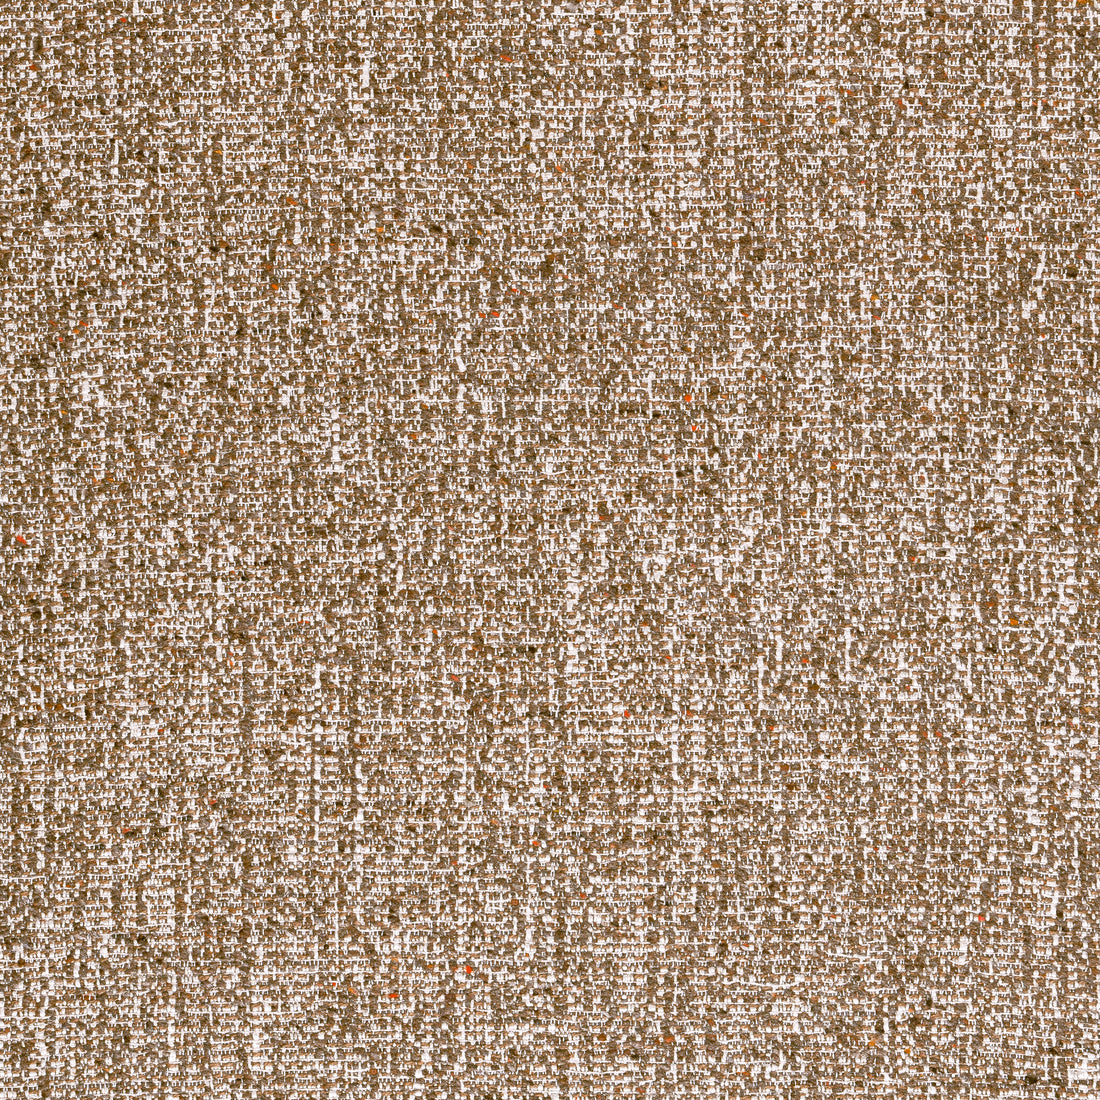 Shannon fabric in bark color - pattern number W80937 - by Thibaut in the Dunmore collection